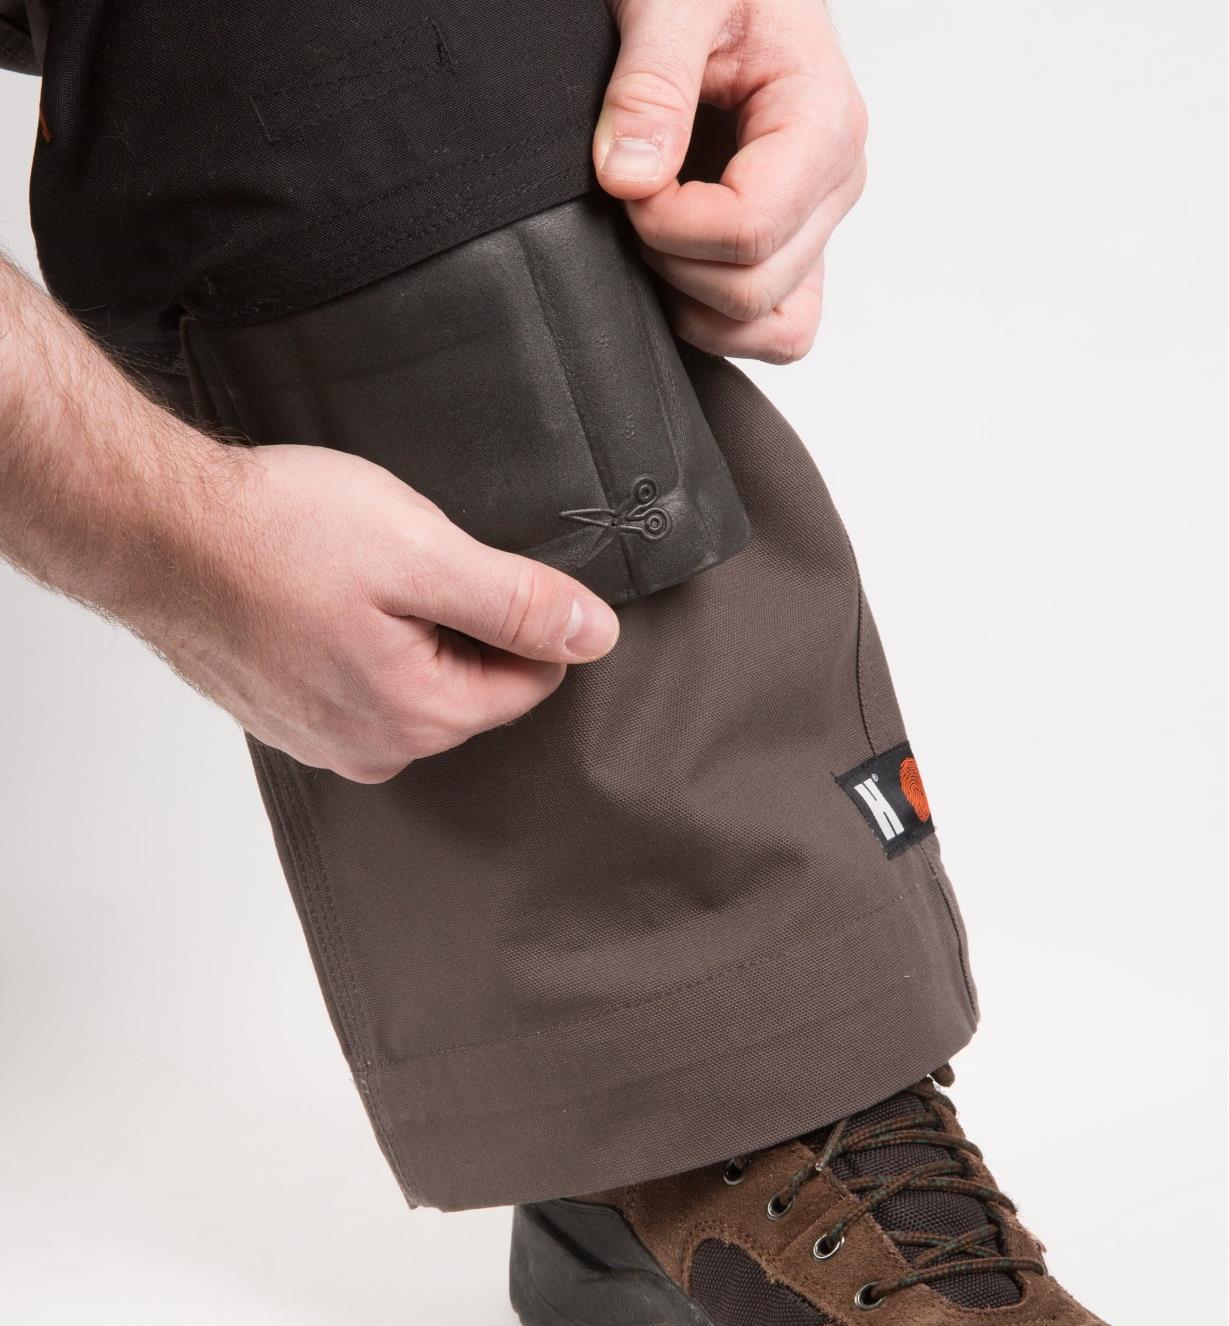 Inserting the knee pad in the pocket of the Gray Heavyweight Pants